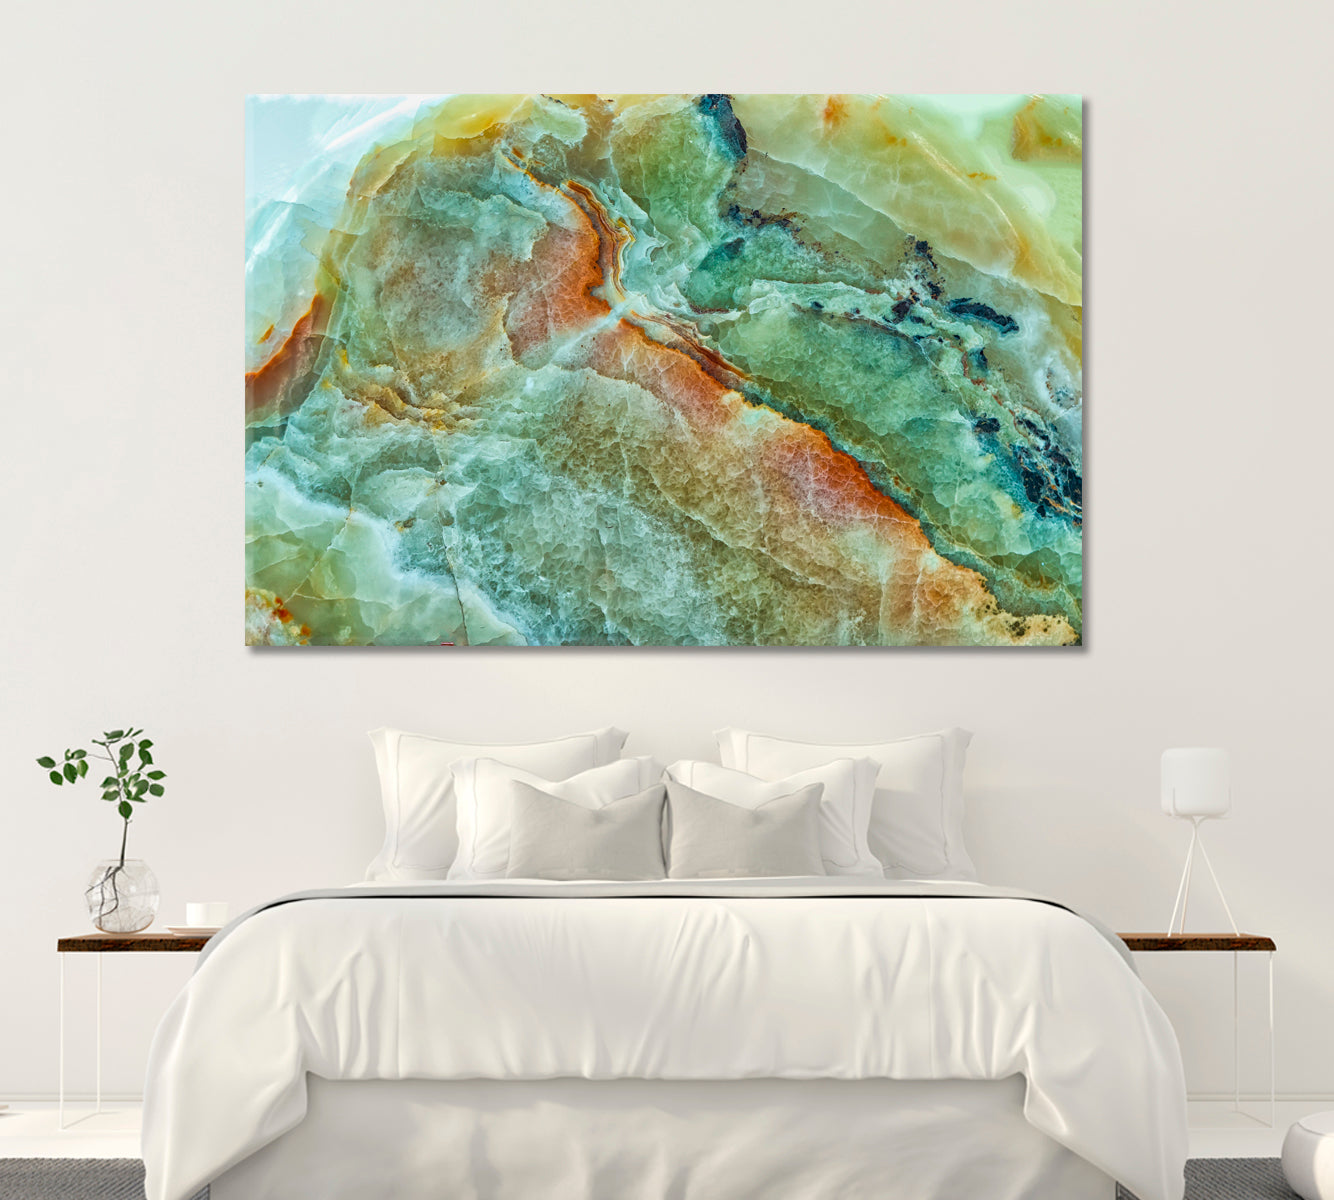 Natural Green Marble Canvas Print ArtLexy 1 Panel 24"x16" inches 